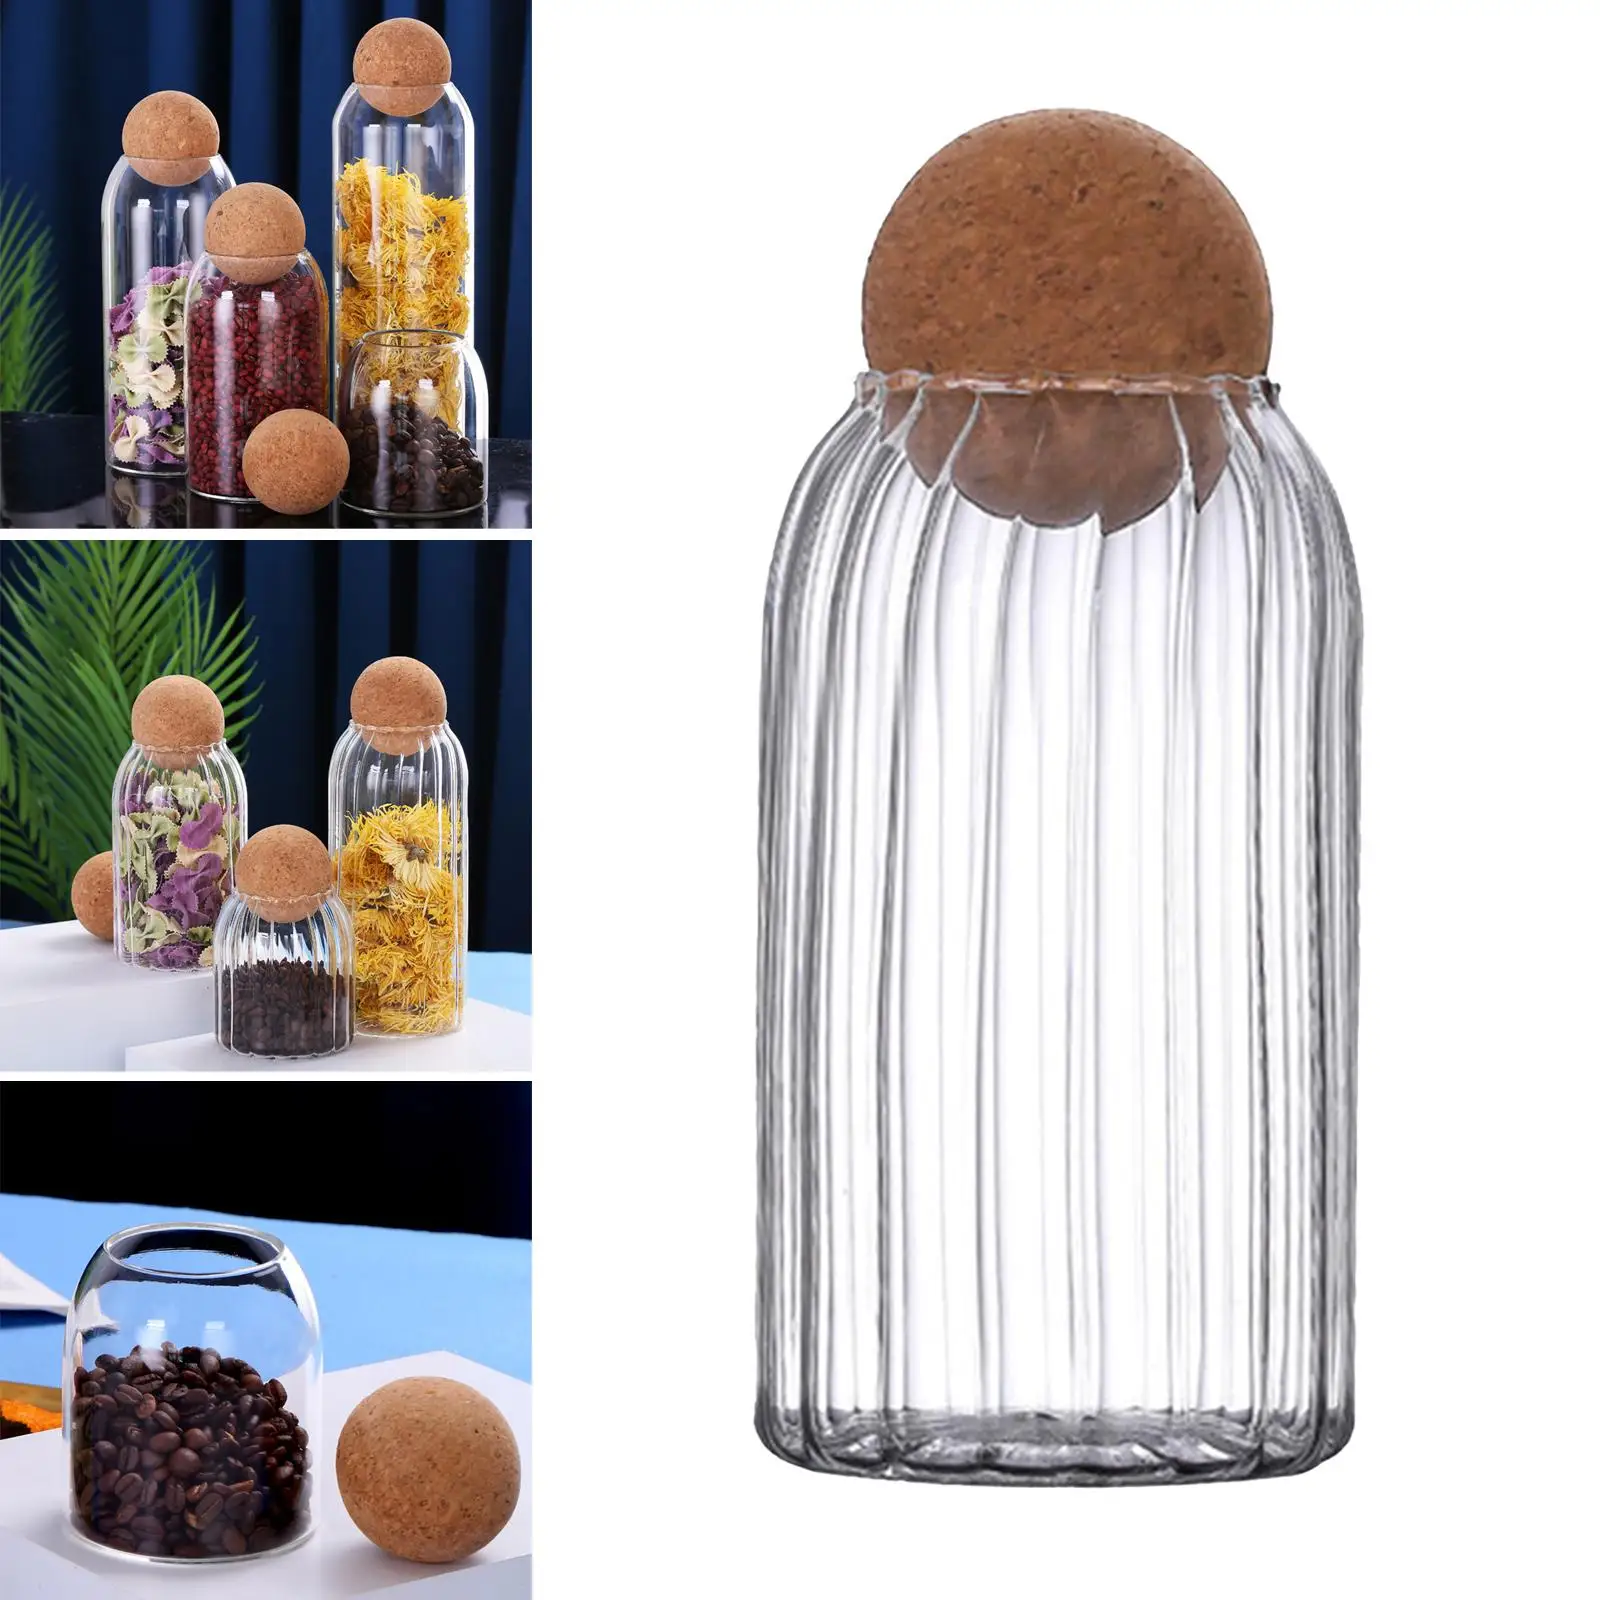  Storage Bottle Jars with Cork Lid Cans Organizer Canister Decorative Container Tank  Coffee Seasoning Cereal